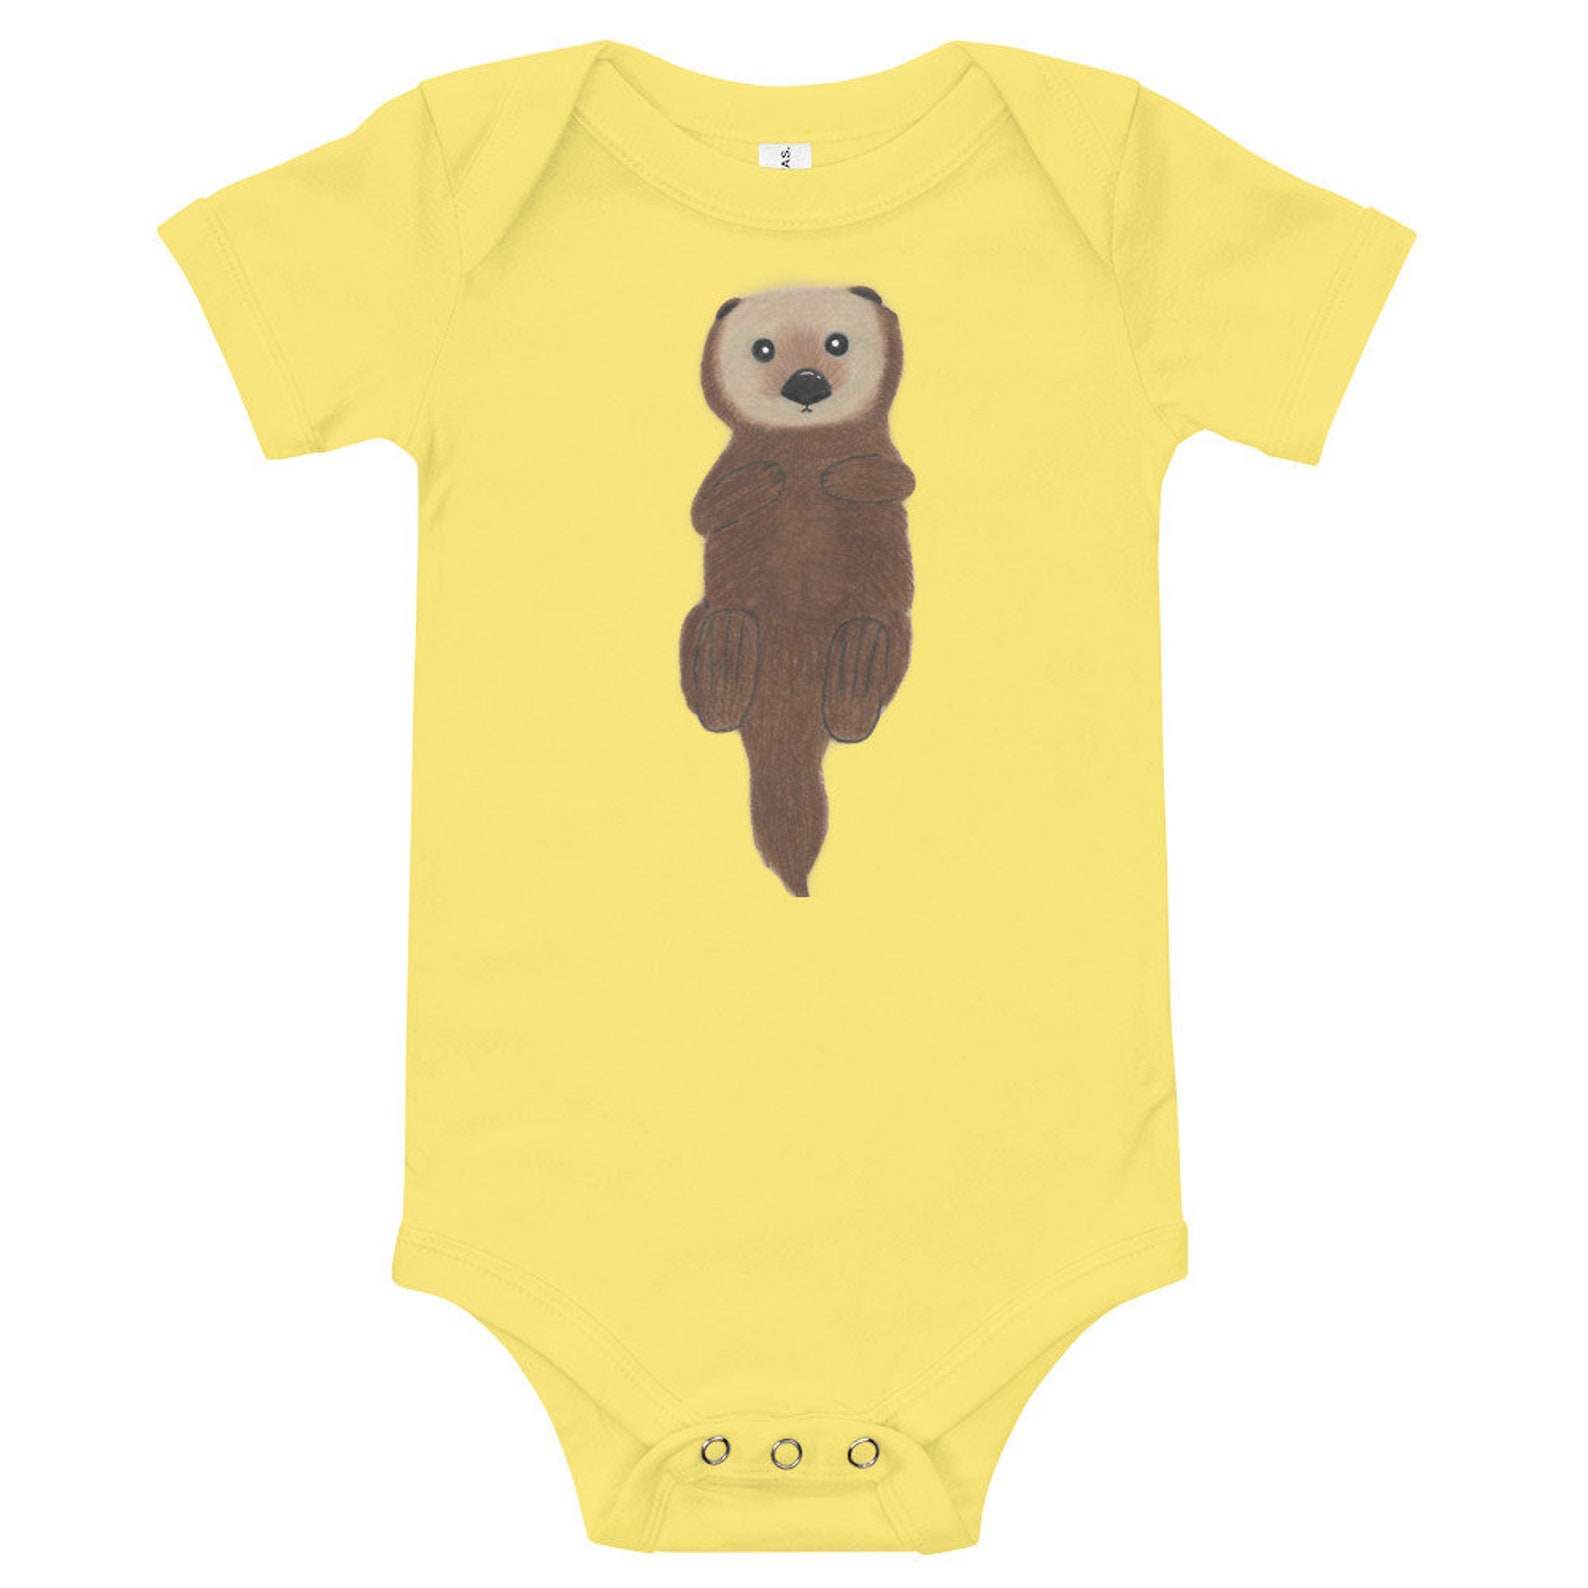 The Wee Otter Baby Onesie - Etsy